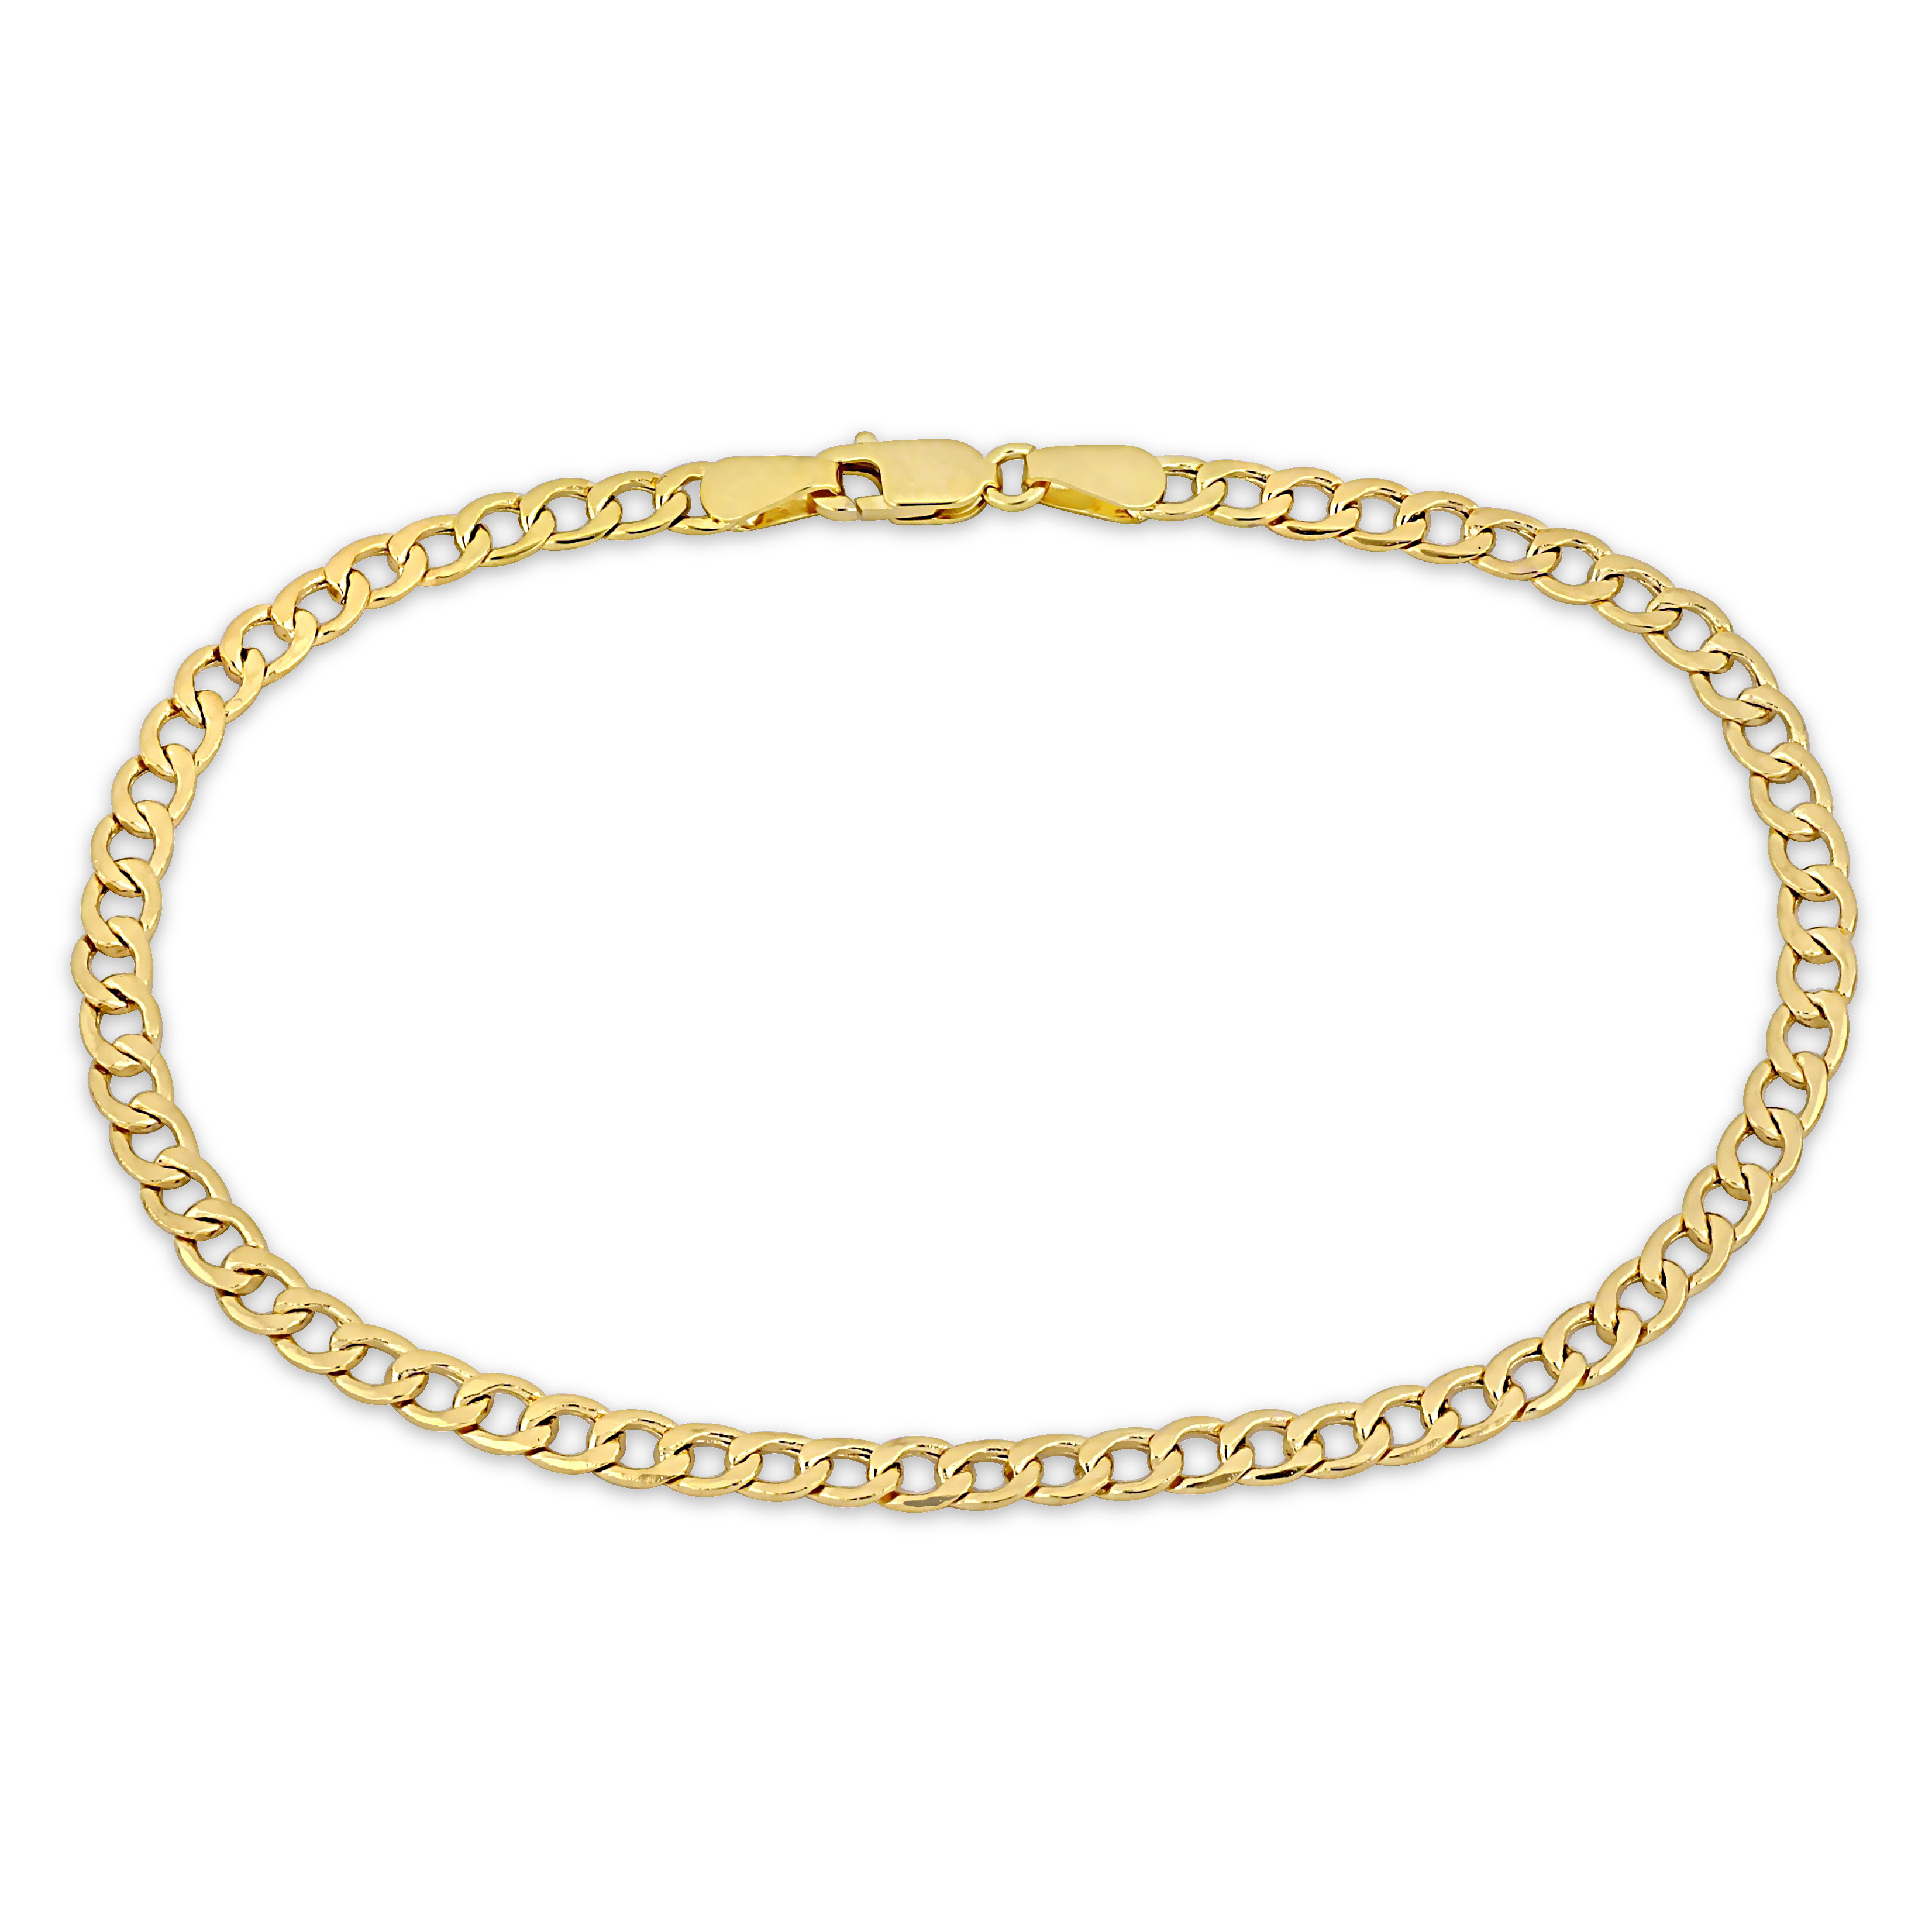 4mm Curb Link Chain Bracelet in 14k Yellow Gold - 7.5 in.